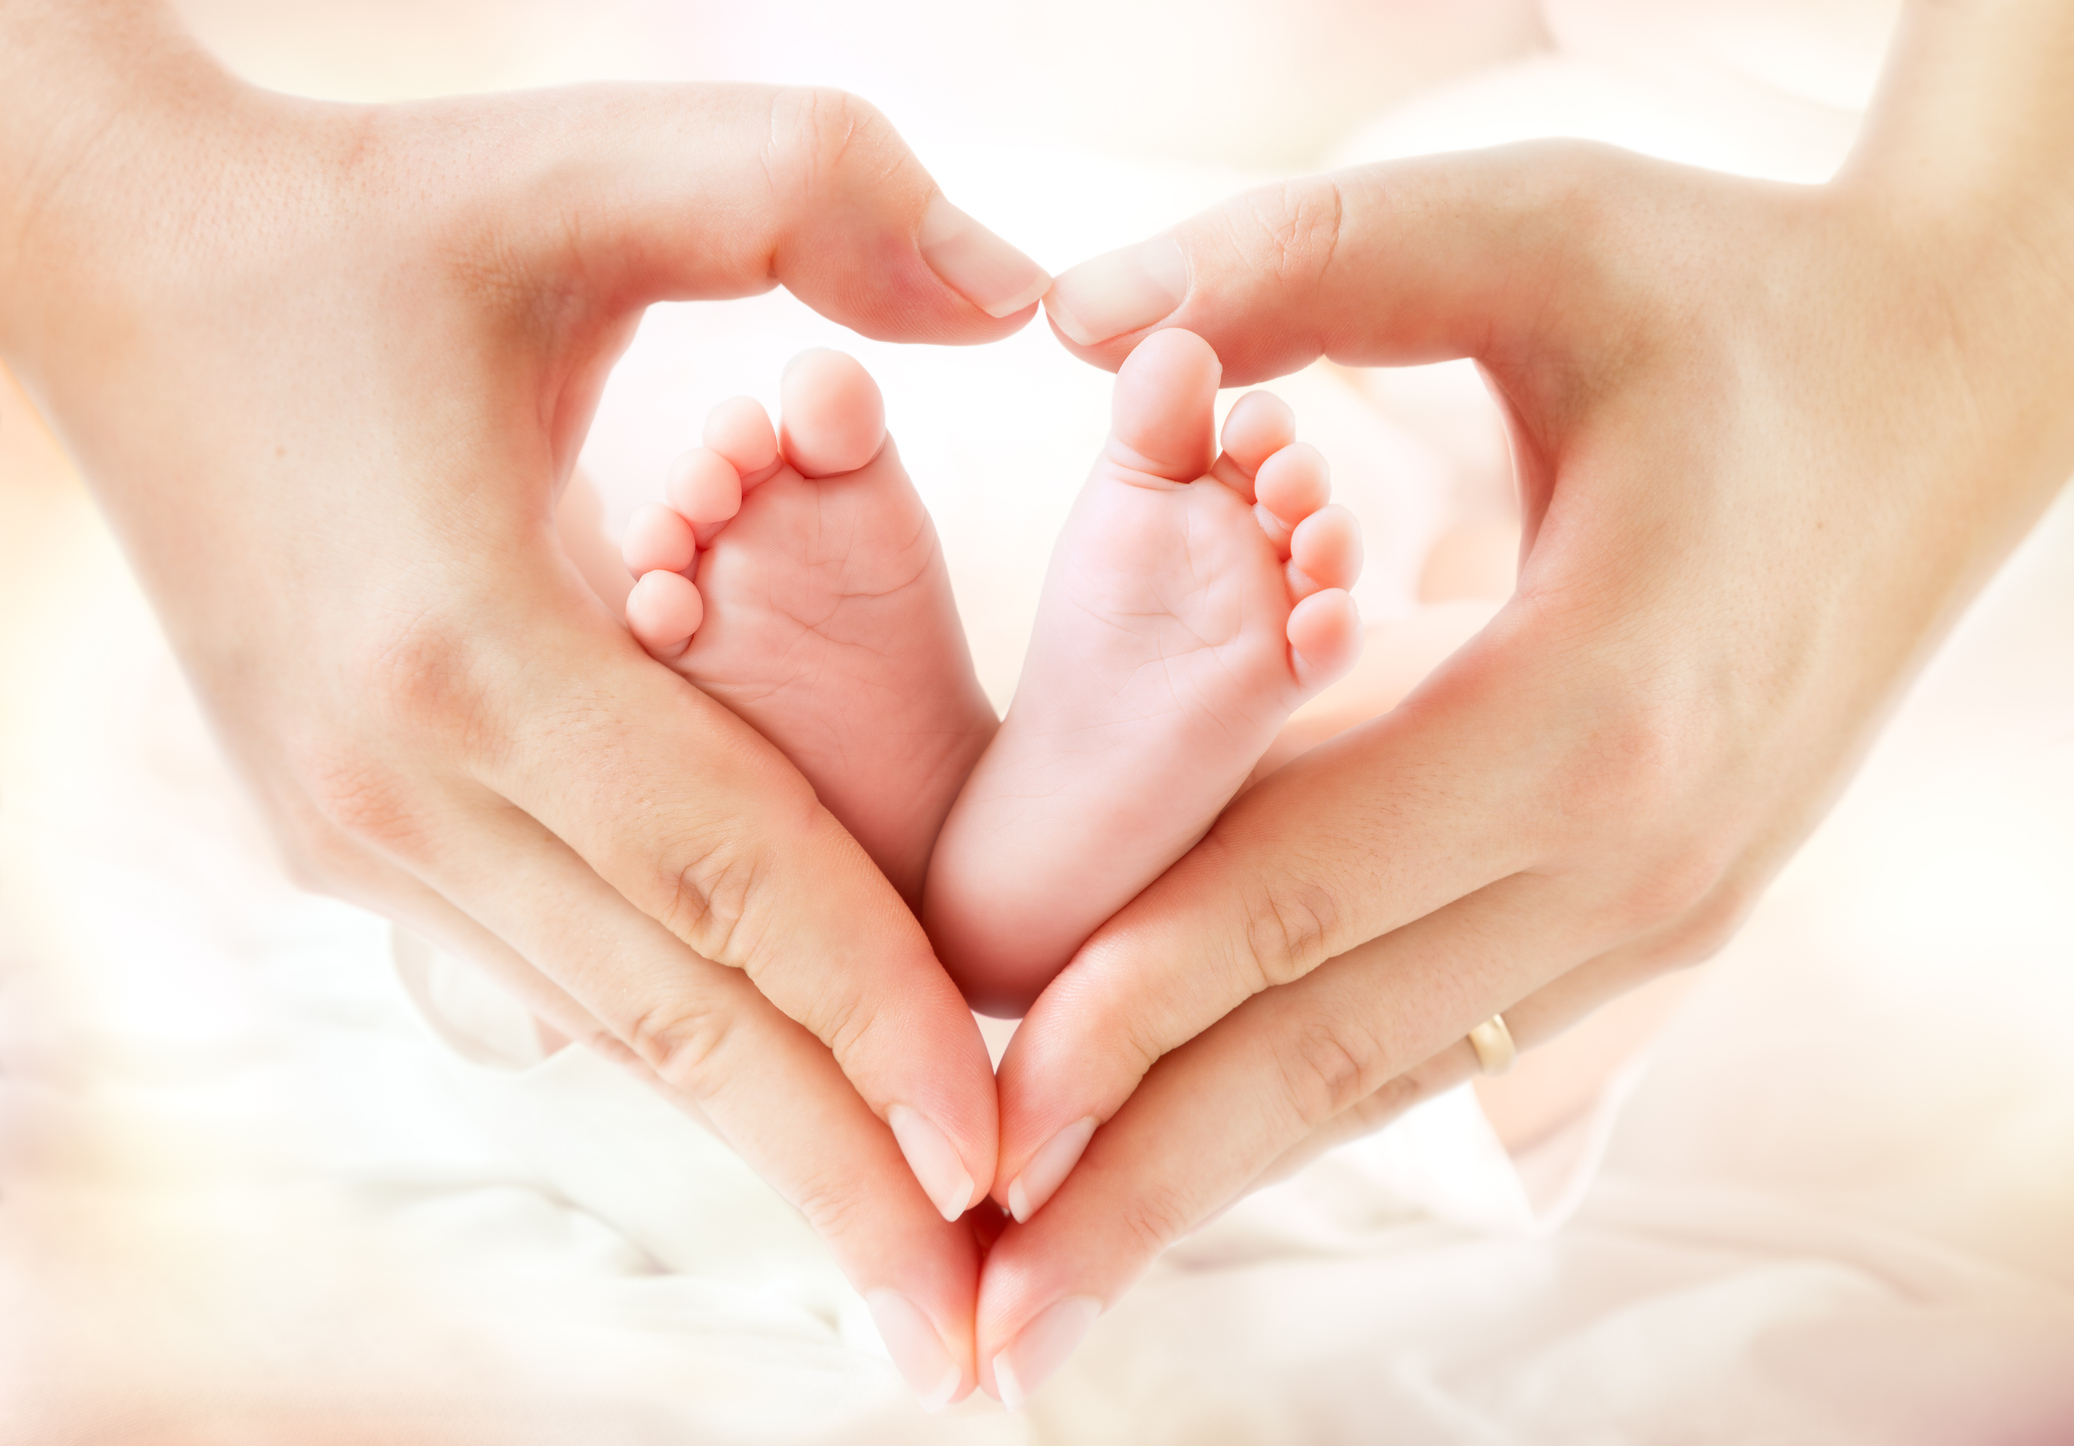 two hands making a heart shape around two baby feet